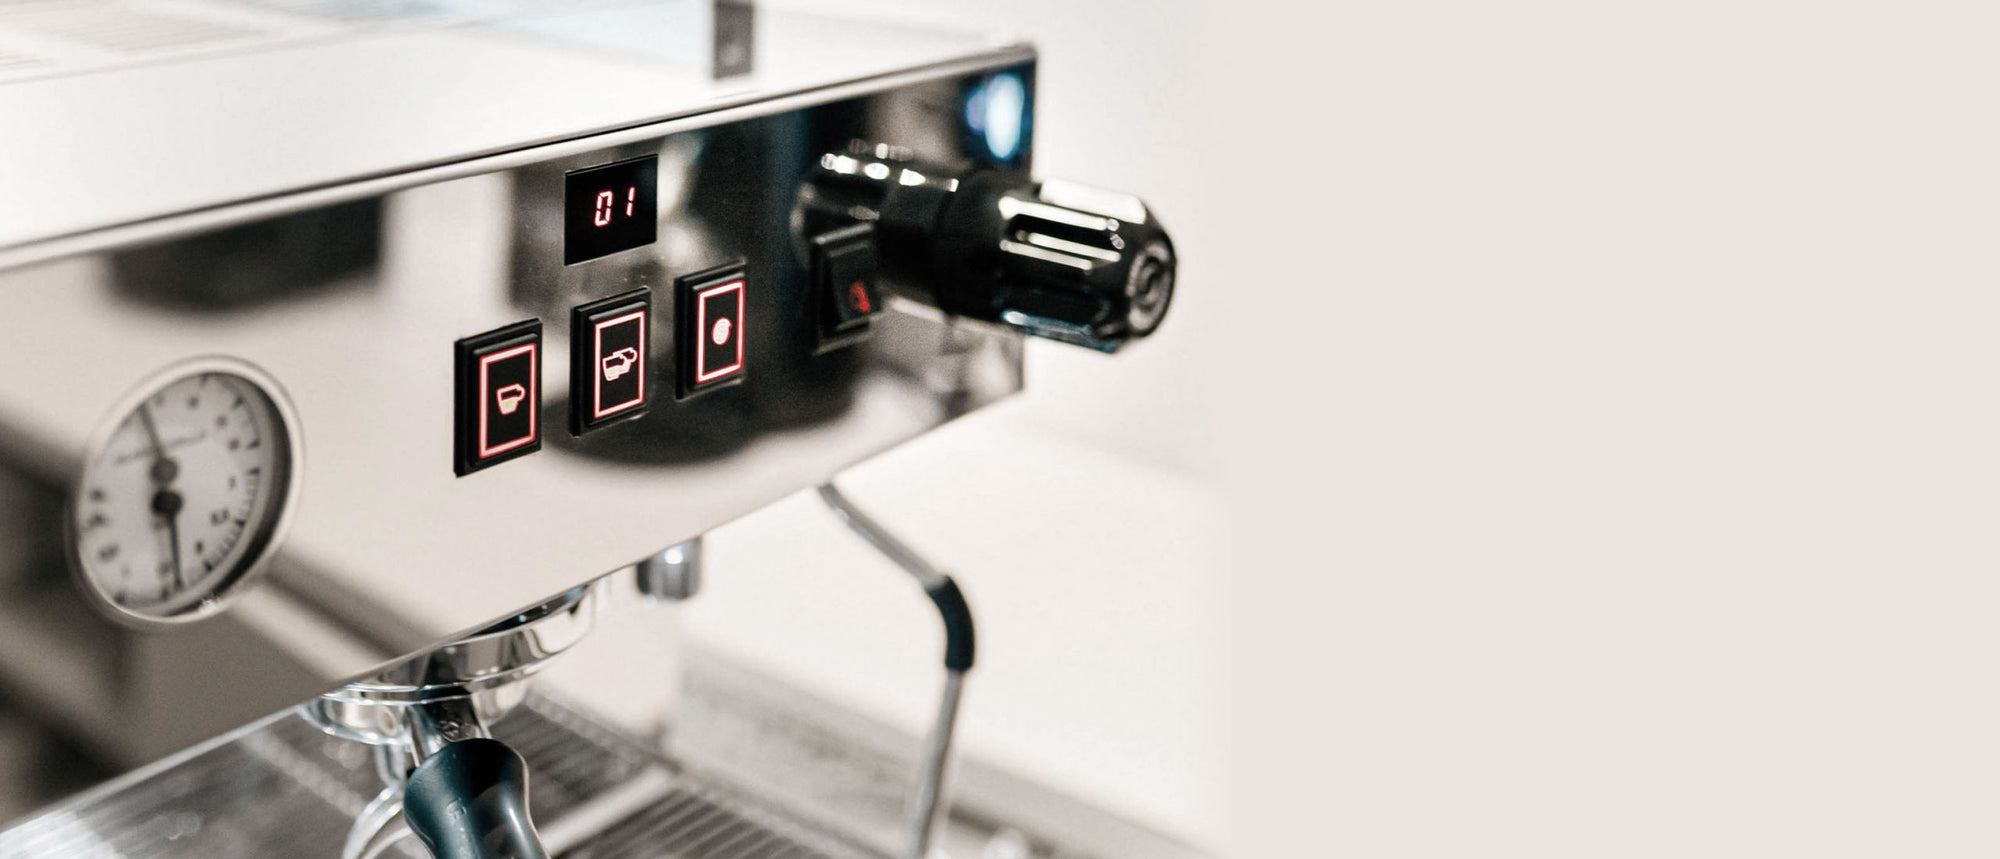 Exploring culinary artistry with the La Marzocco Linea Classic S AV: a detailed review